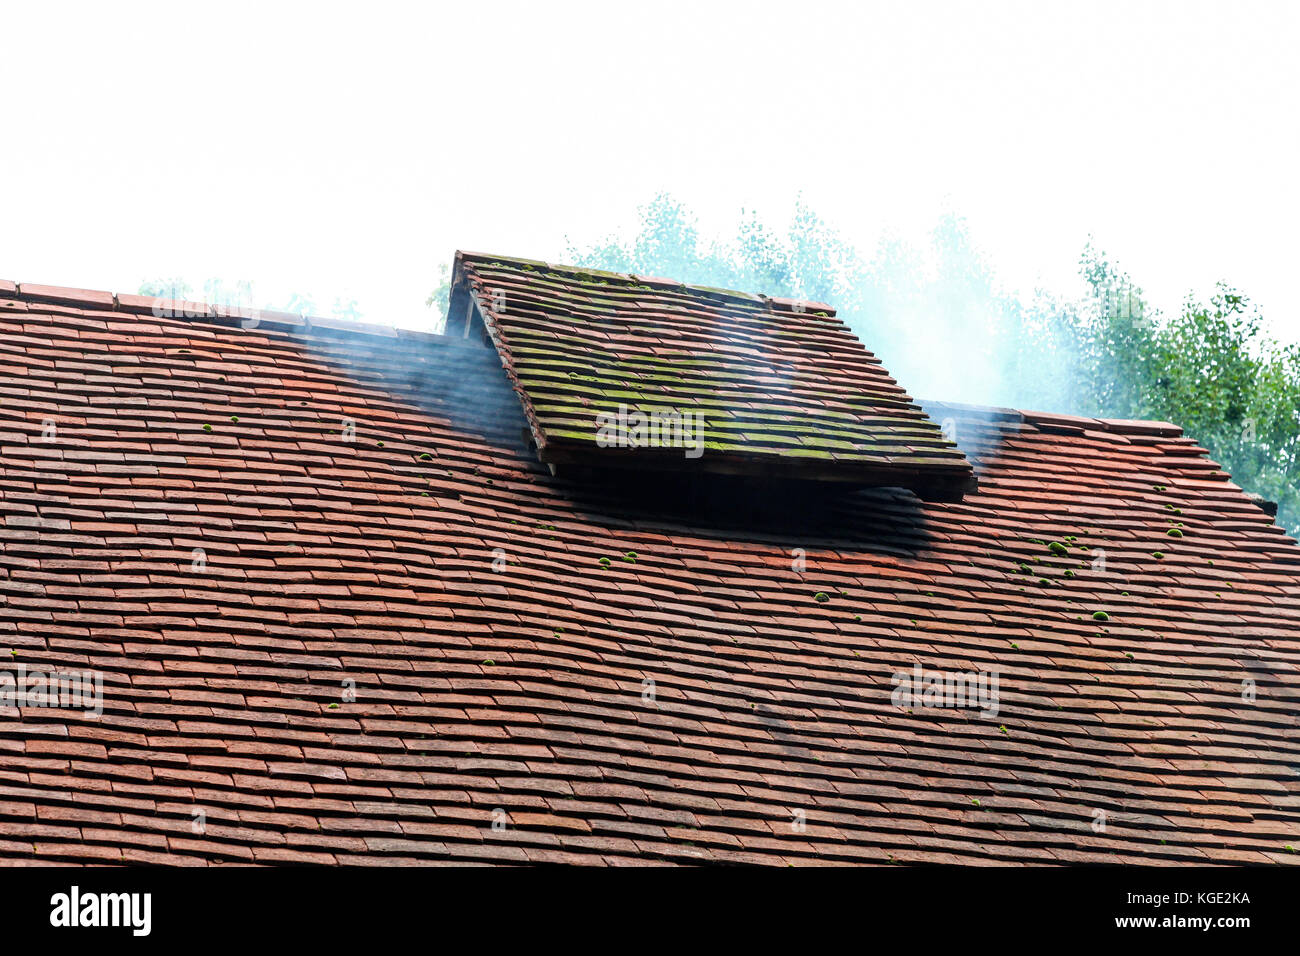 An old fashioned chimney on a roof of a timber framed house at the Avoncroft Museum of Buildings, Bromsgrove, Worcestershire, England, UK Stock Photo